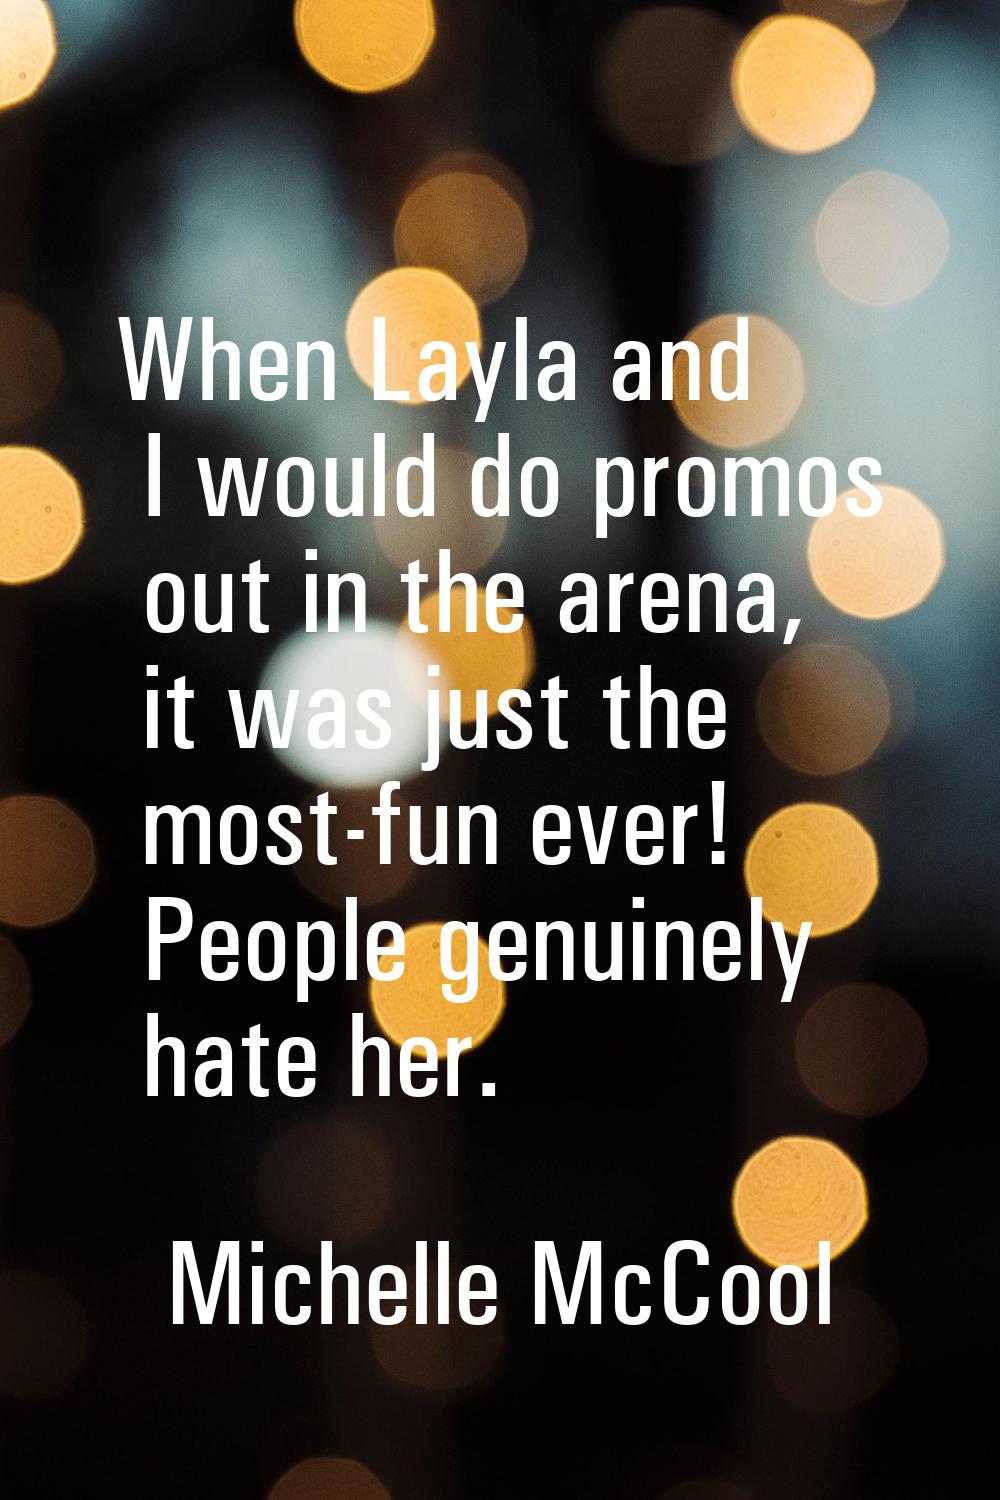 When Layla and I would do promos out in the arena, it was just the most-fun ever! People genuinely 